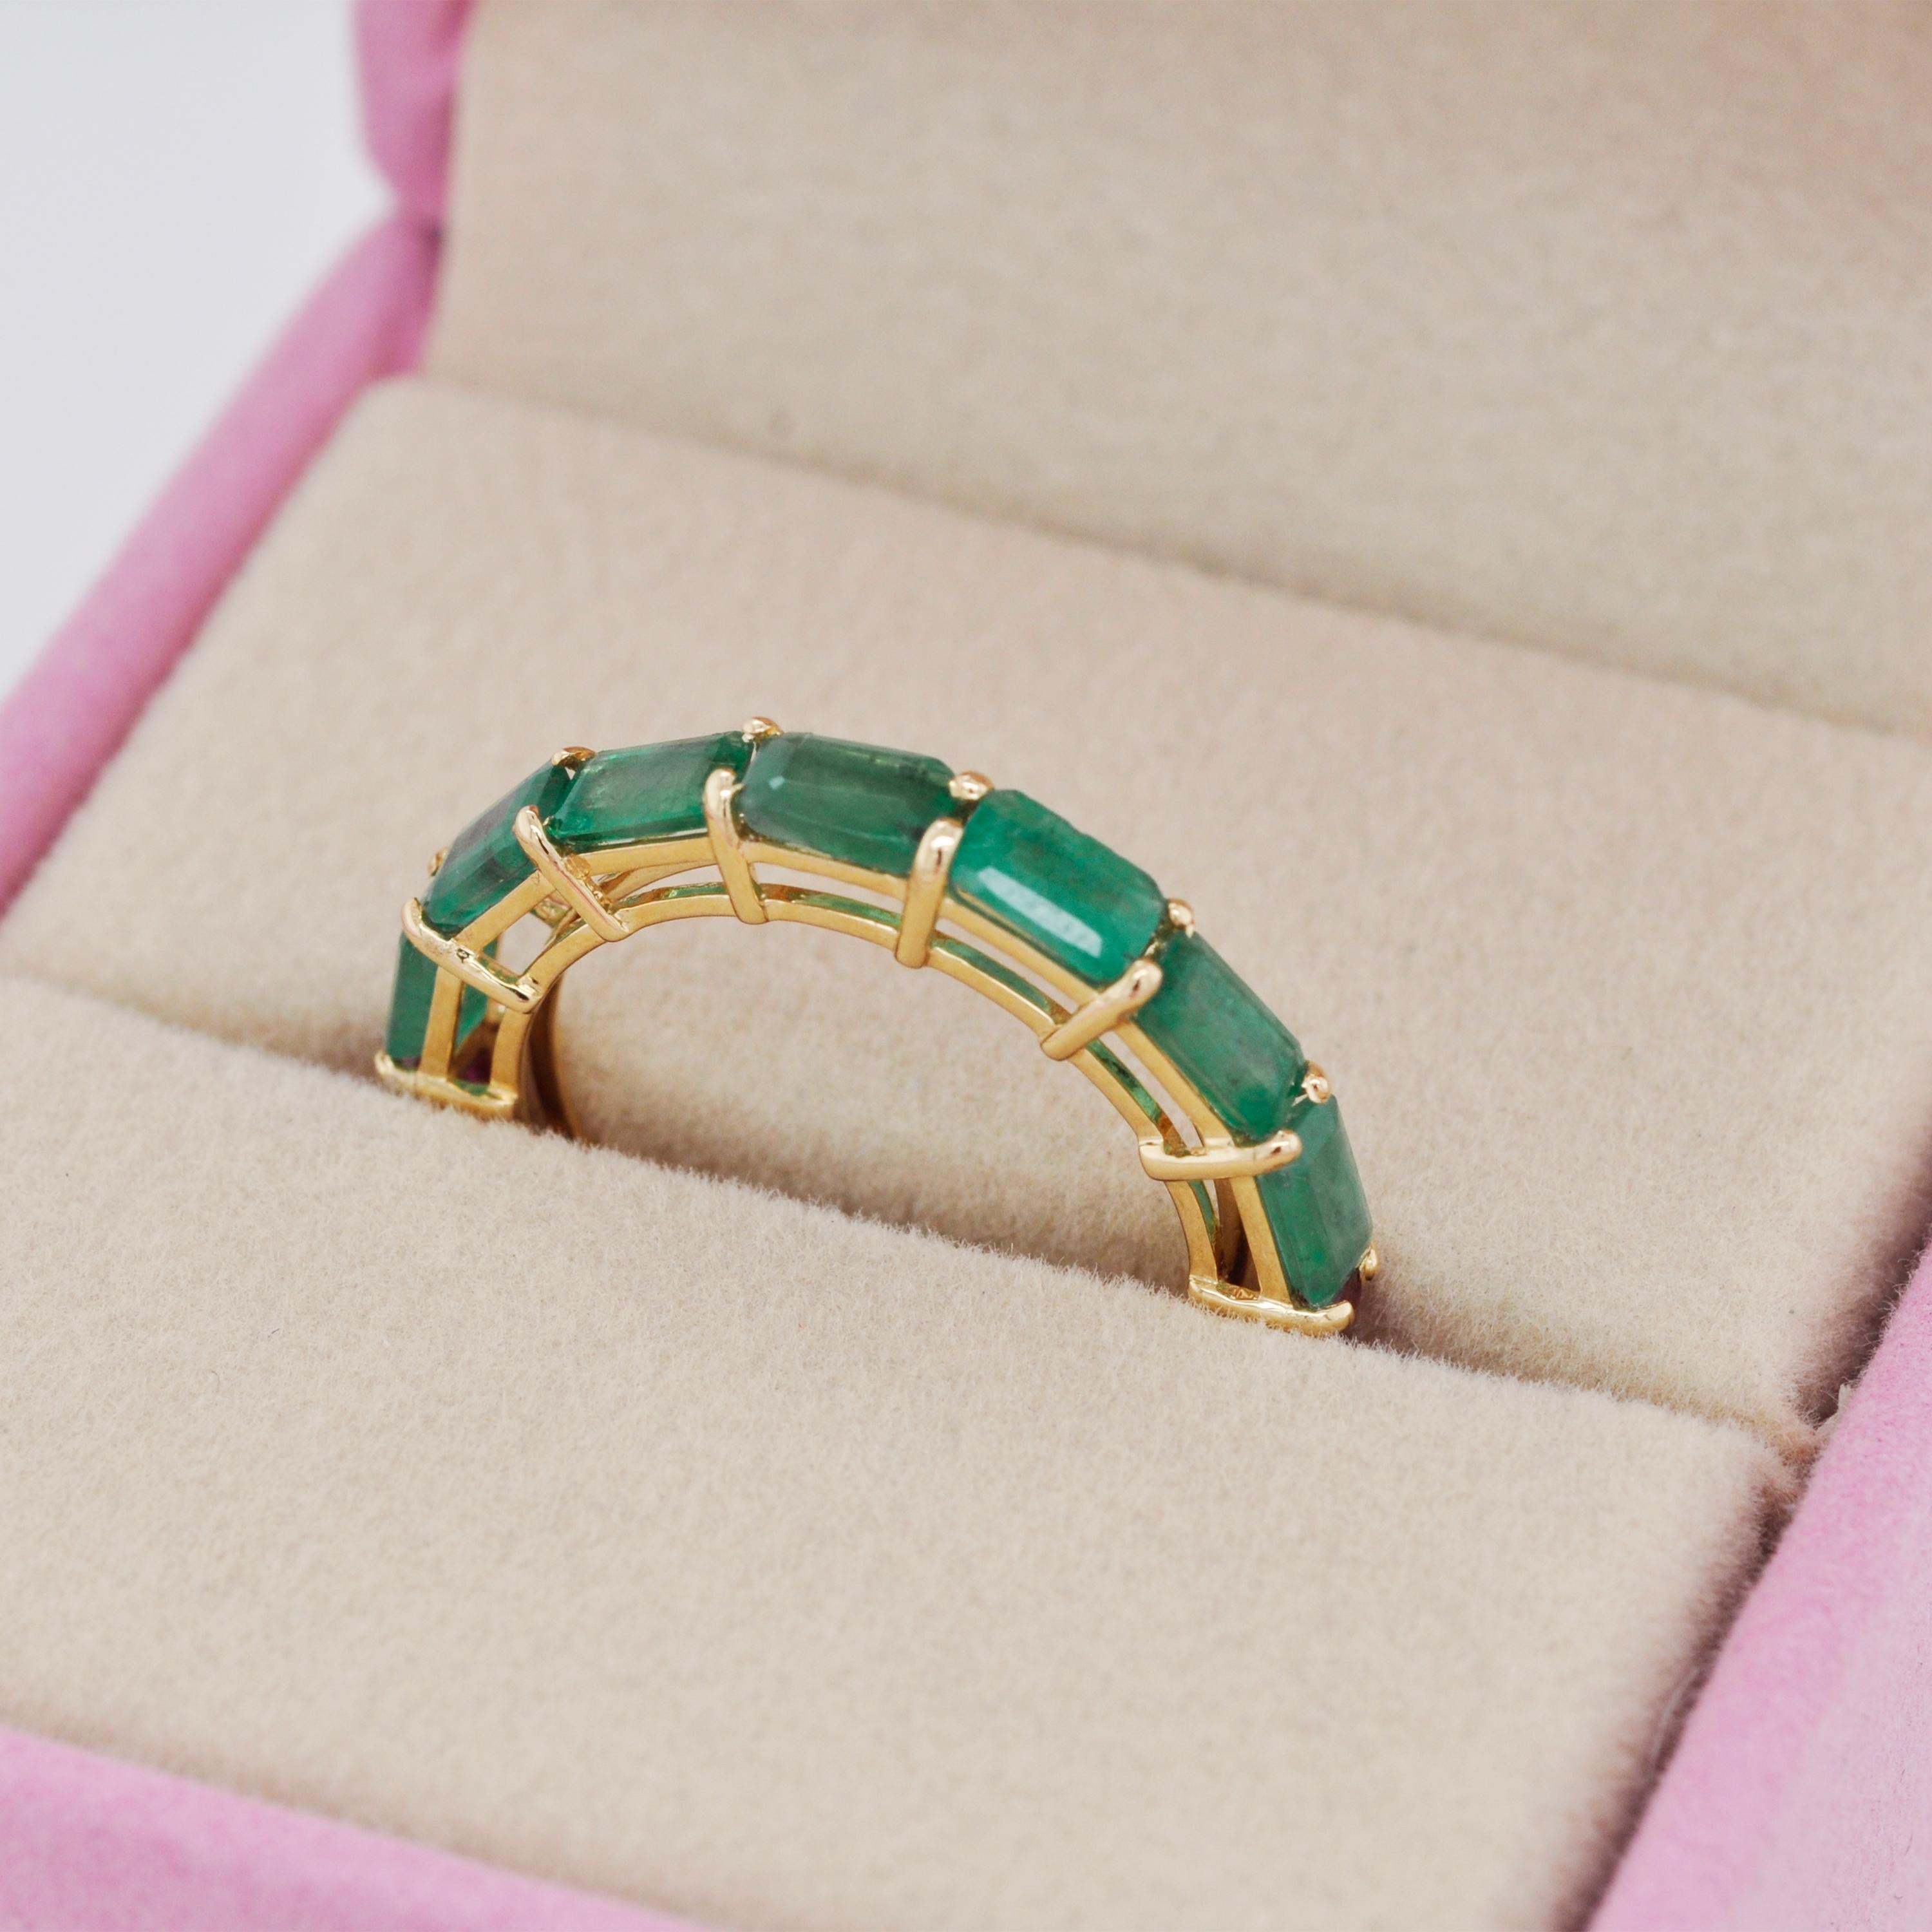 For Sale:  18K Yellow Gold Zambian Emerald Mozambique Ruby 5x3 MM Octagon Eternity Ring 6